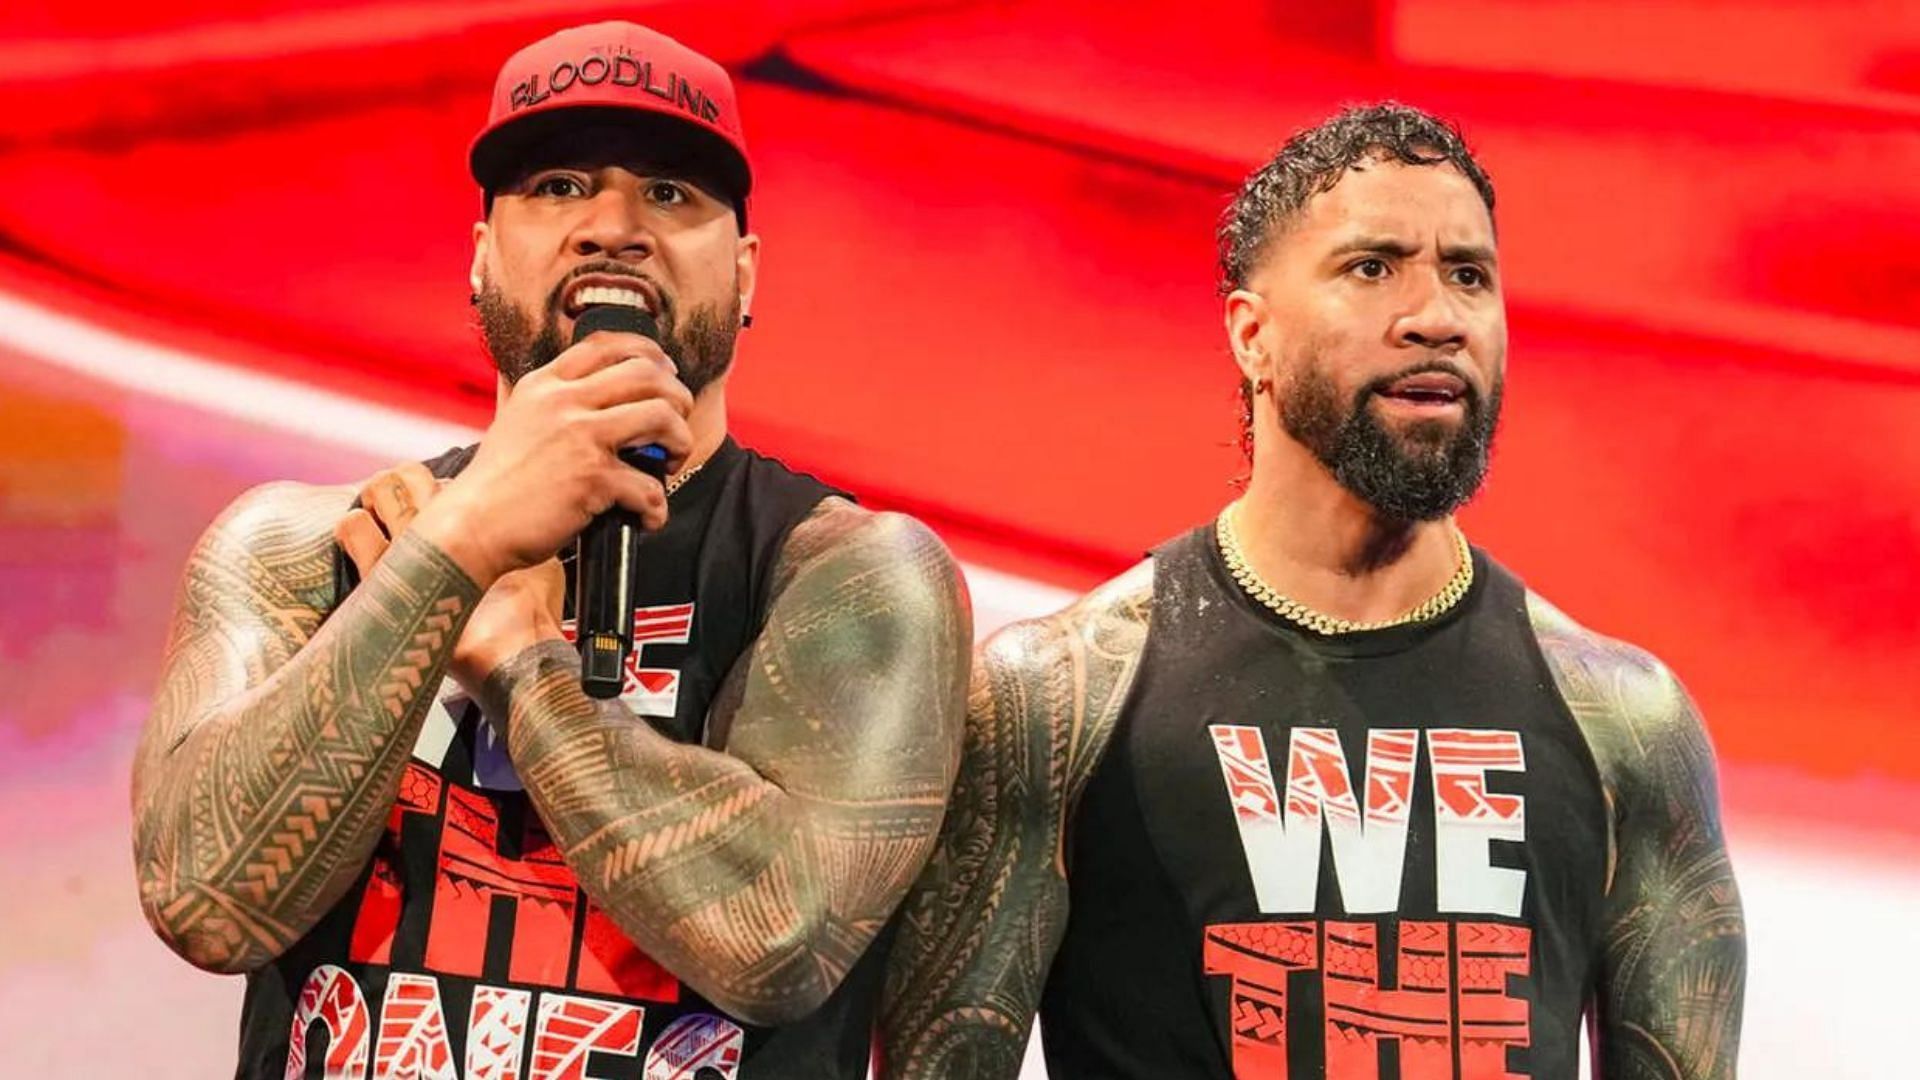 Jey Uso is no longer a member of The Bloodline. 